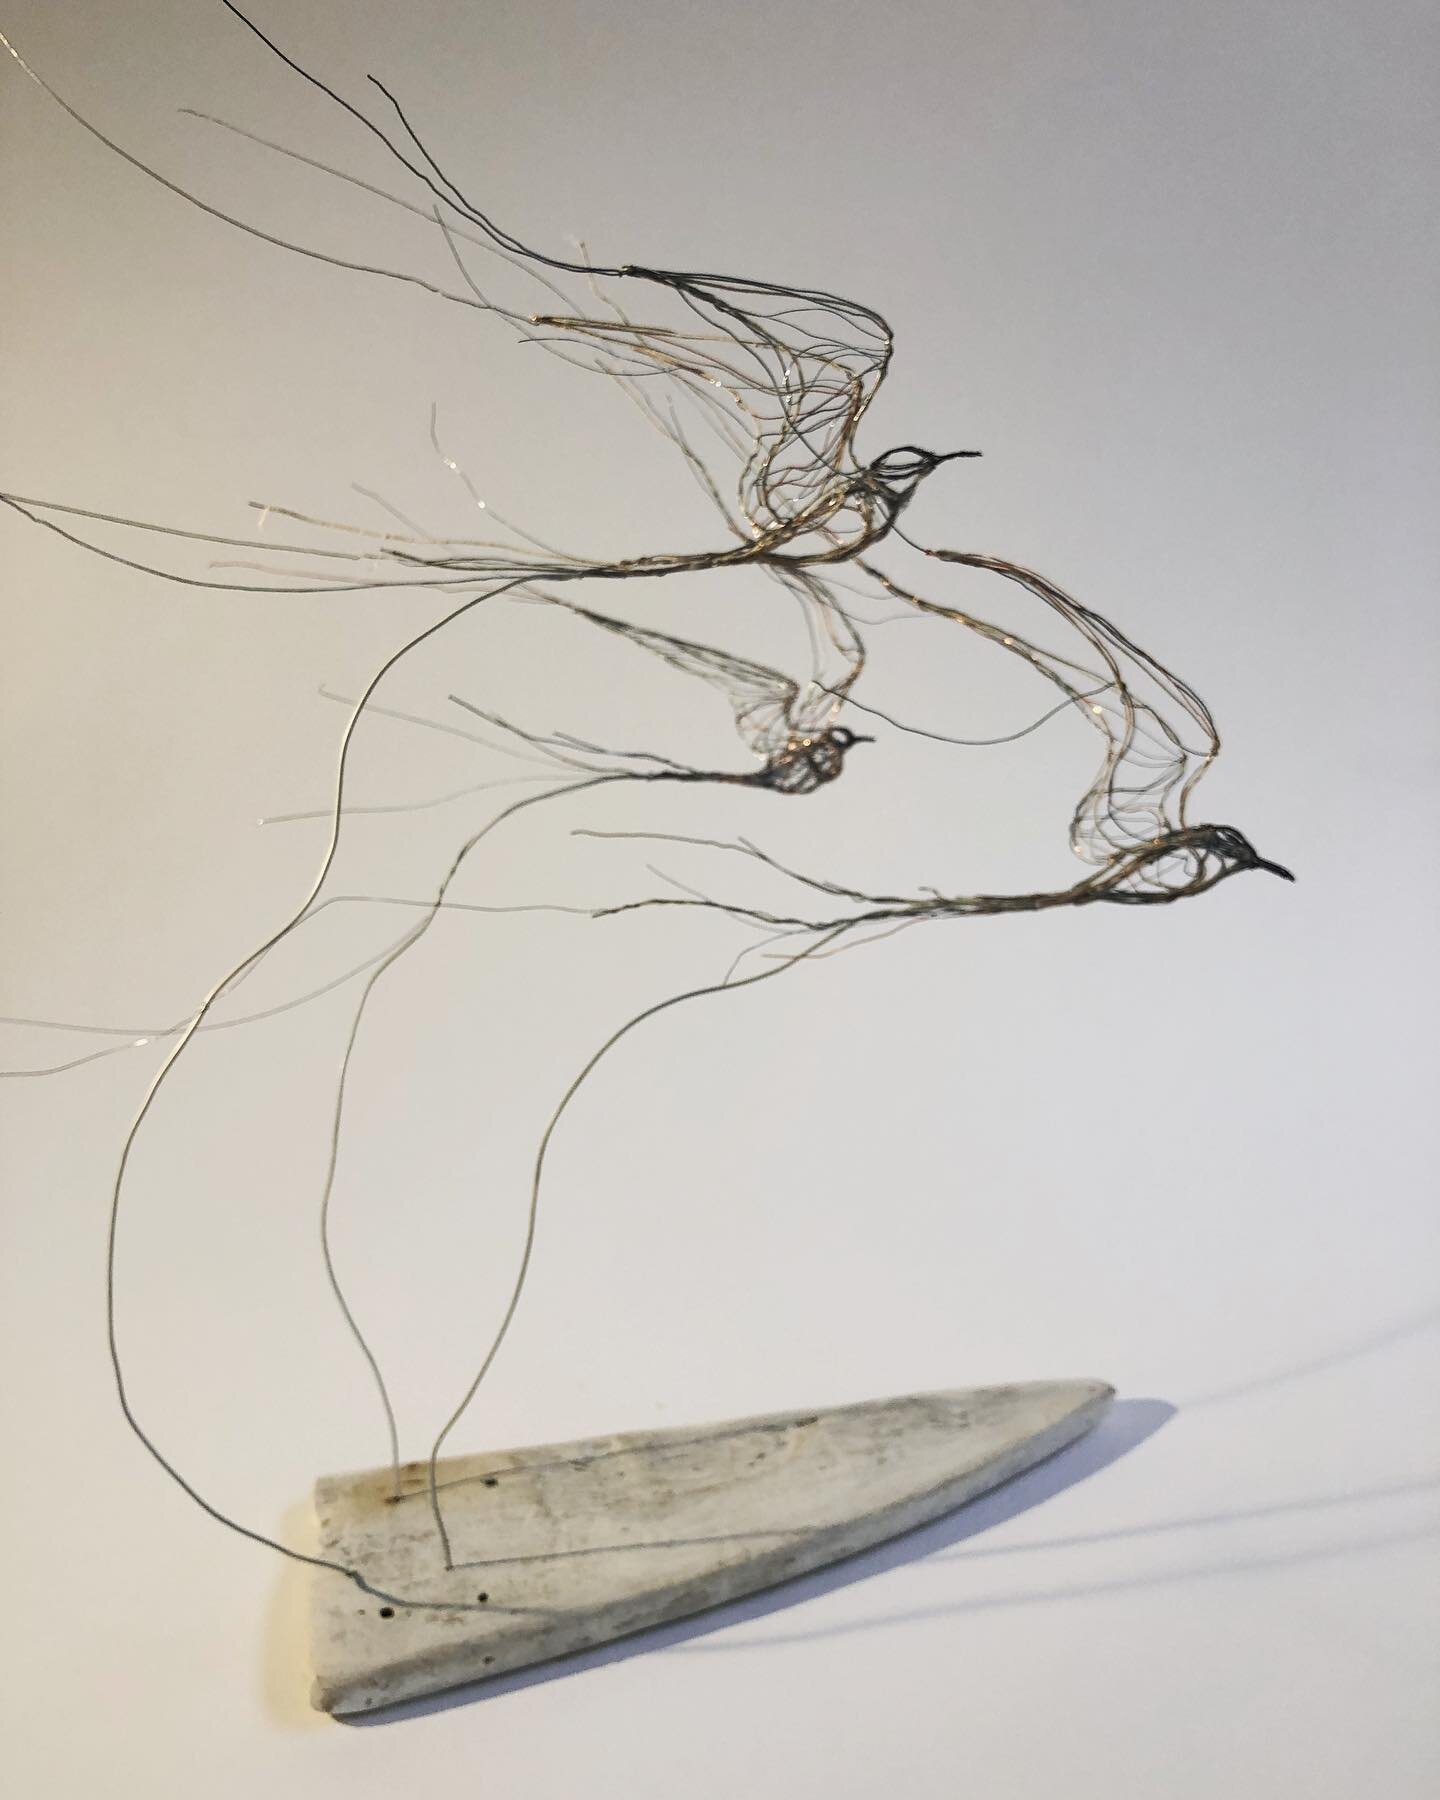 Thrilled to have my work in @societyofwildlifeartists Natural Eye Exhibition @mallgalleries The wire terns were &lsquo;sketched&rsquo; in the field sitting near the Cemlyn breeding colony on Anglesey. They were studies so I could use them as a memory